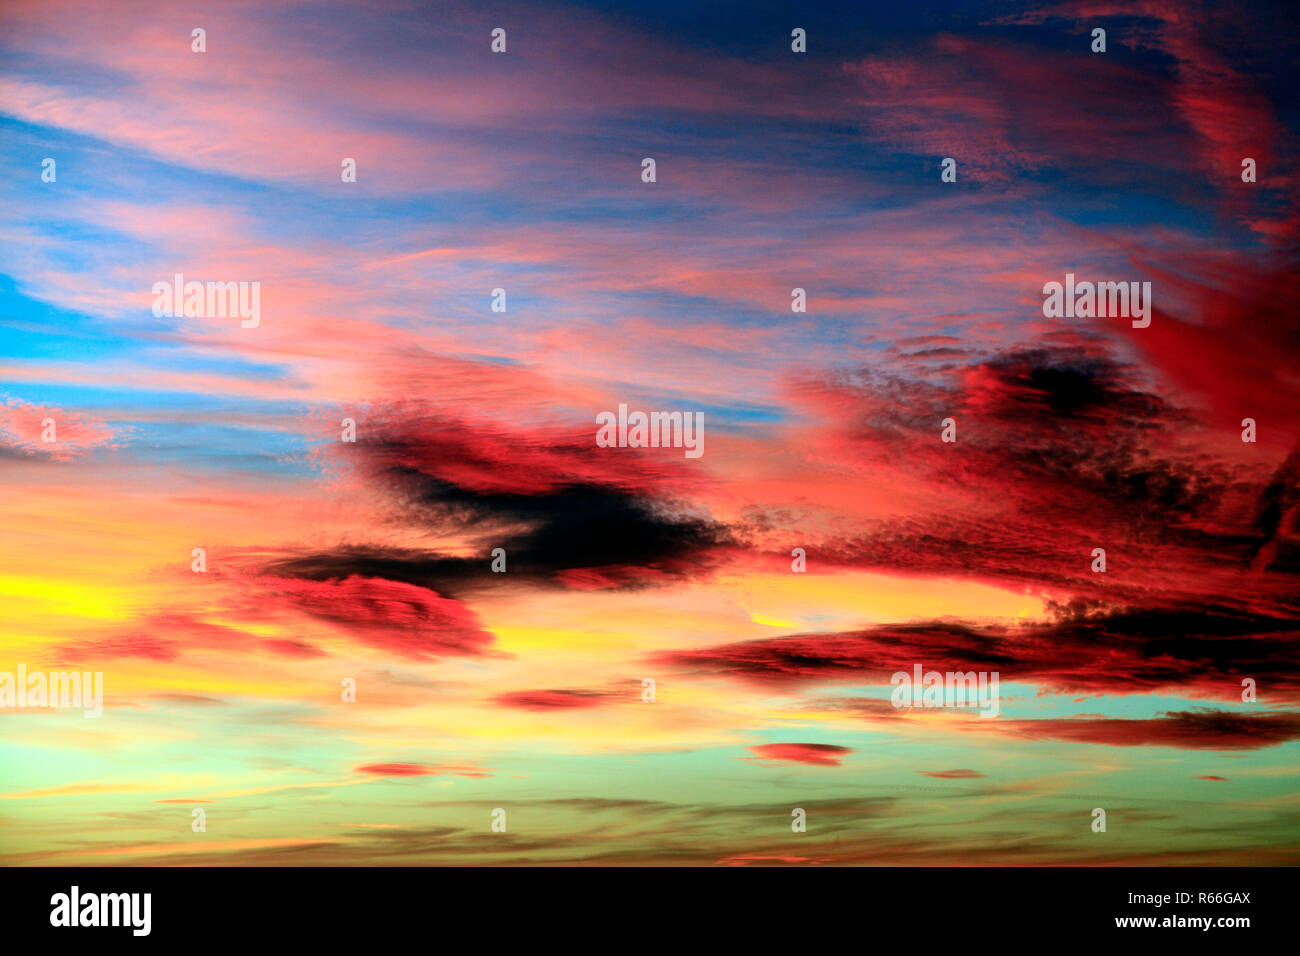 Red, pink, orange, yellow, blue, sky, cloud, clouds, evening light, warm, colour, colourful, skies, formation, formations, dramatic, England, UK Stock Photo